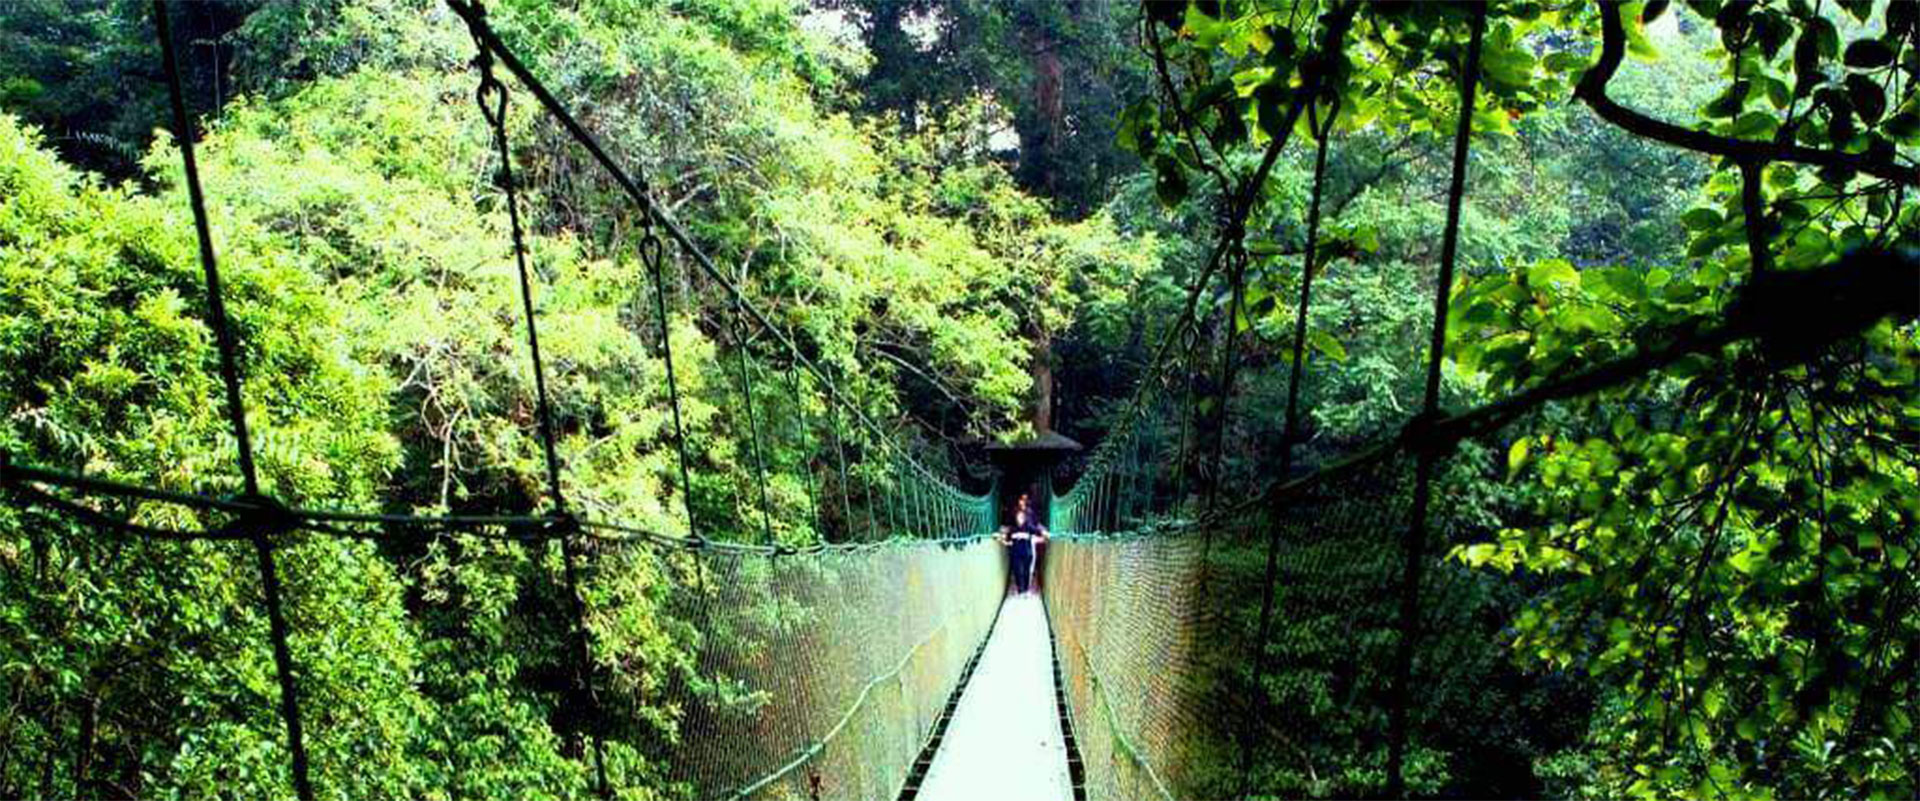 Canopy Trail TNGGP Cimacan